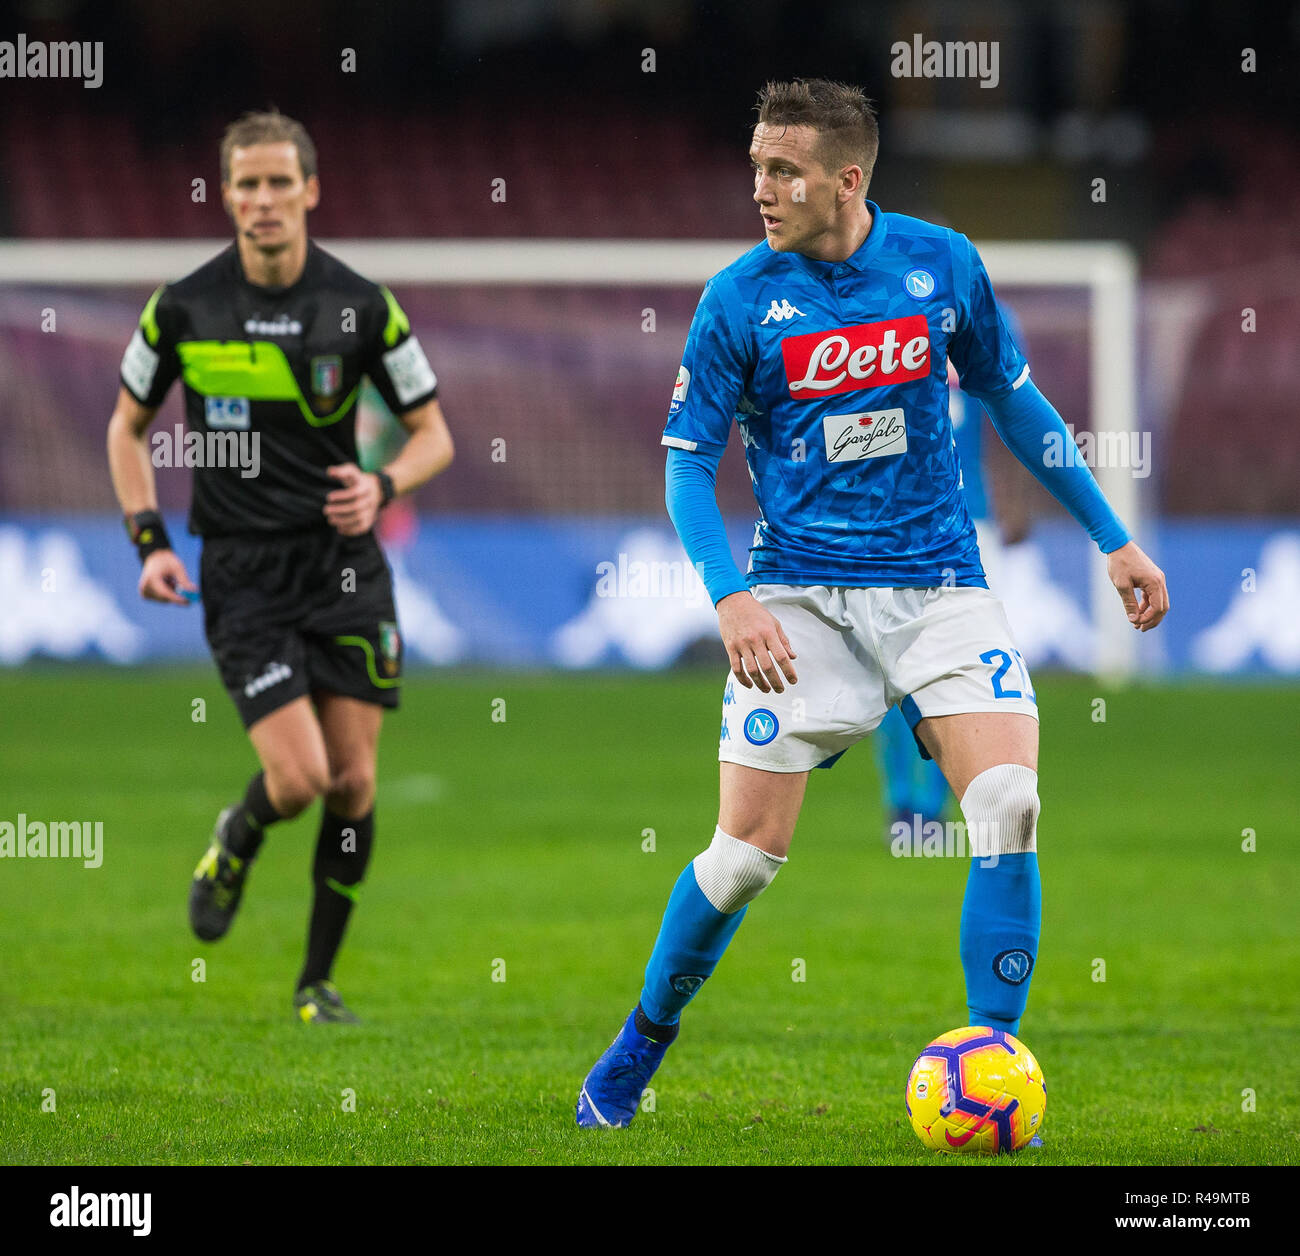 Piotr Zielinski of SSC Napoli seen in action during the SSC Napoli vs A.C. Chievo Serie A football match at the San Paolo Stadium. (Final score; SSC Napoli 0:0 Chievo ) Stock Photo